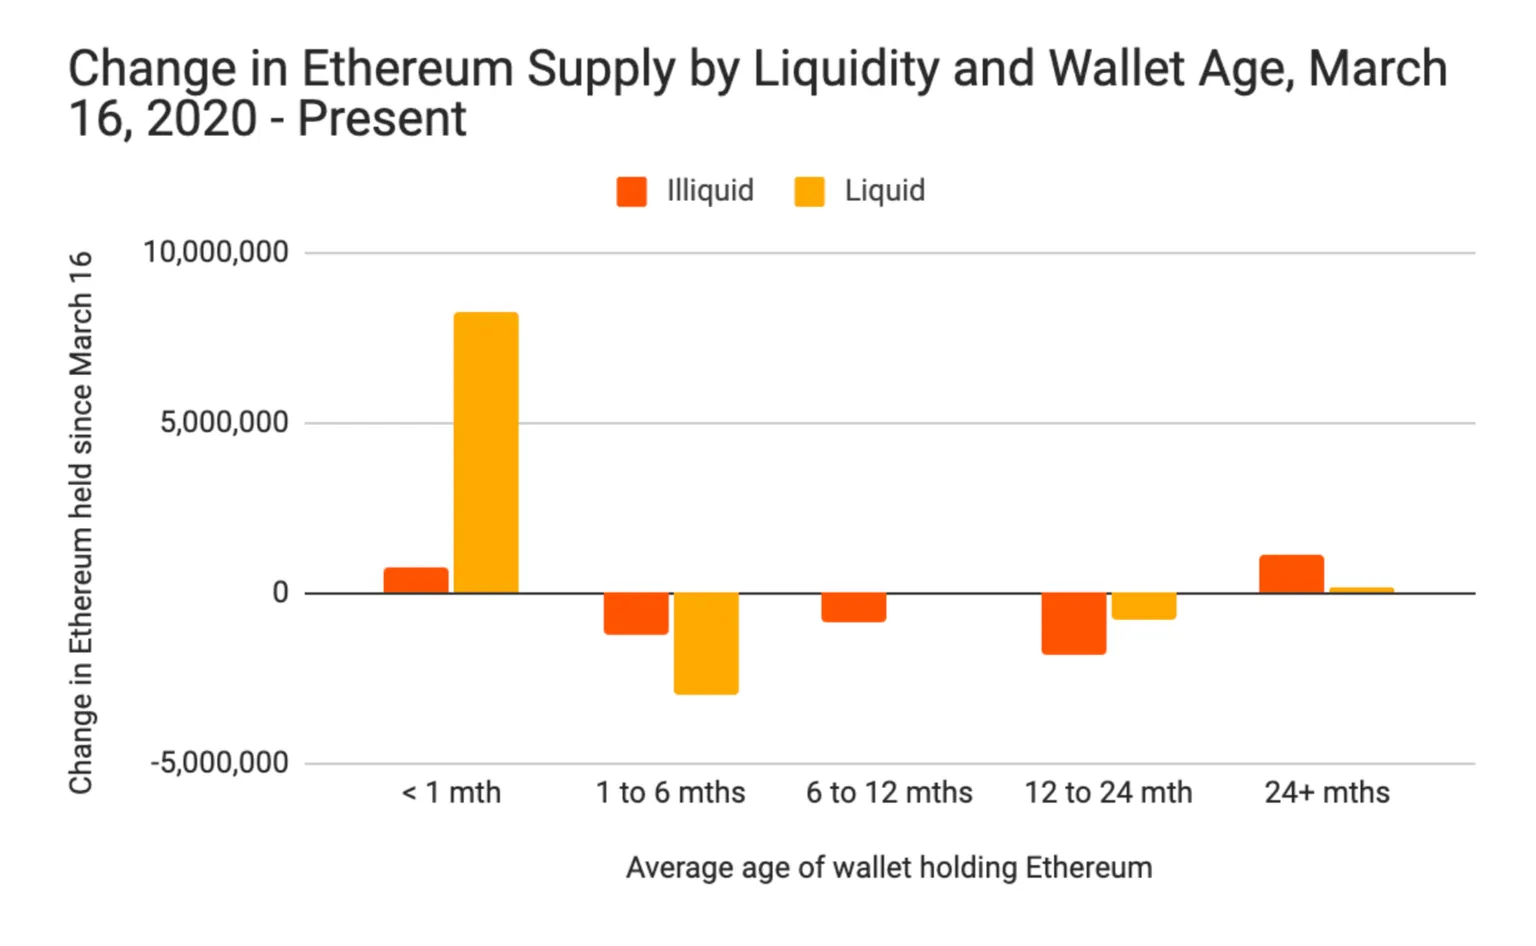 Change in Ethereum supply by liquidity and wallet age from March to November 2020